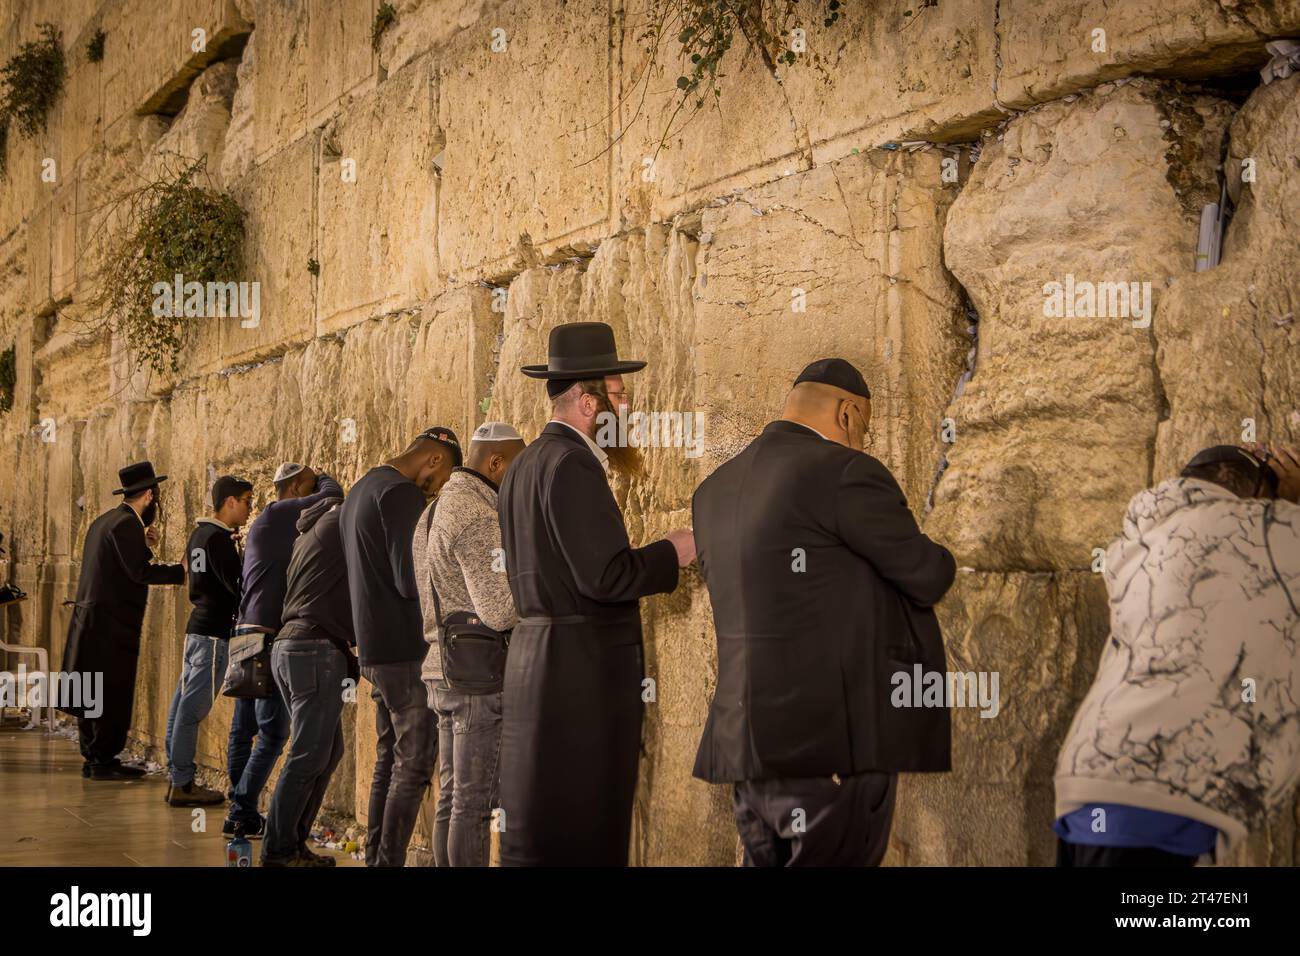 The religious Jewish people praying at Western wall (Wailing Wall), the Jewish shrine, at Jerusalem Old Town in Israel. Stock Photo